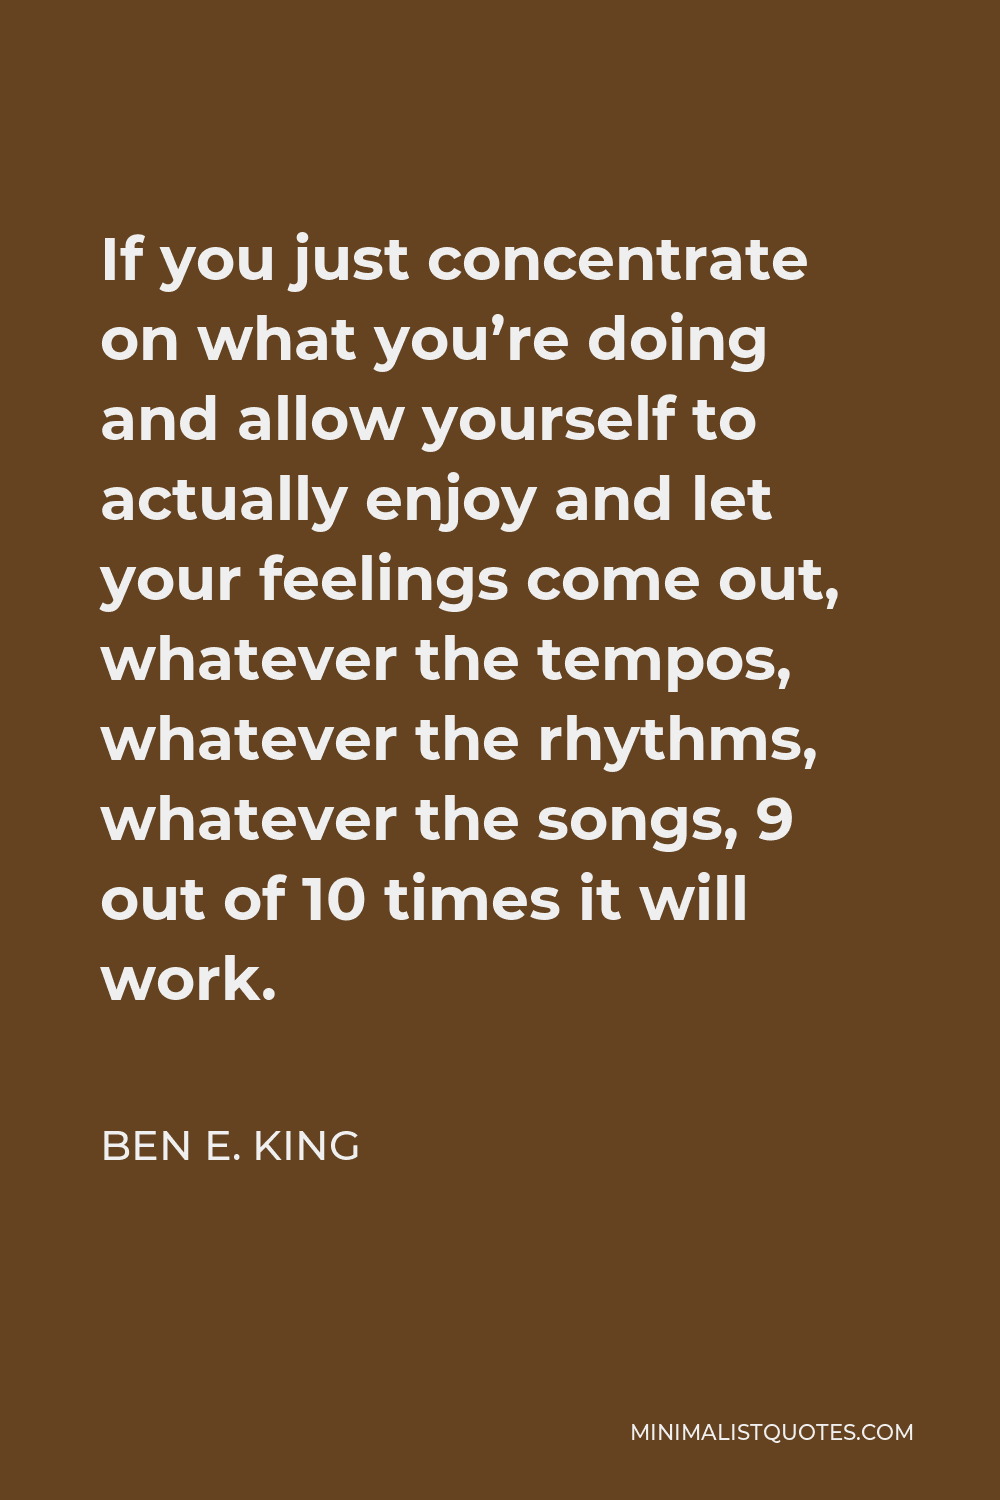 Ben E. King Quote - If you just concentrate on what you’re doing and allow yourself to actually enjoy and let your feelings come out, whatever the tempos, whatever the rhythms, whatever the songs, 9 out of 10 times it will work.